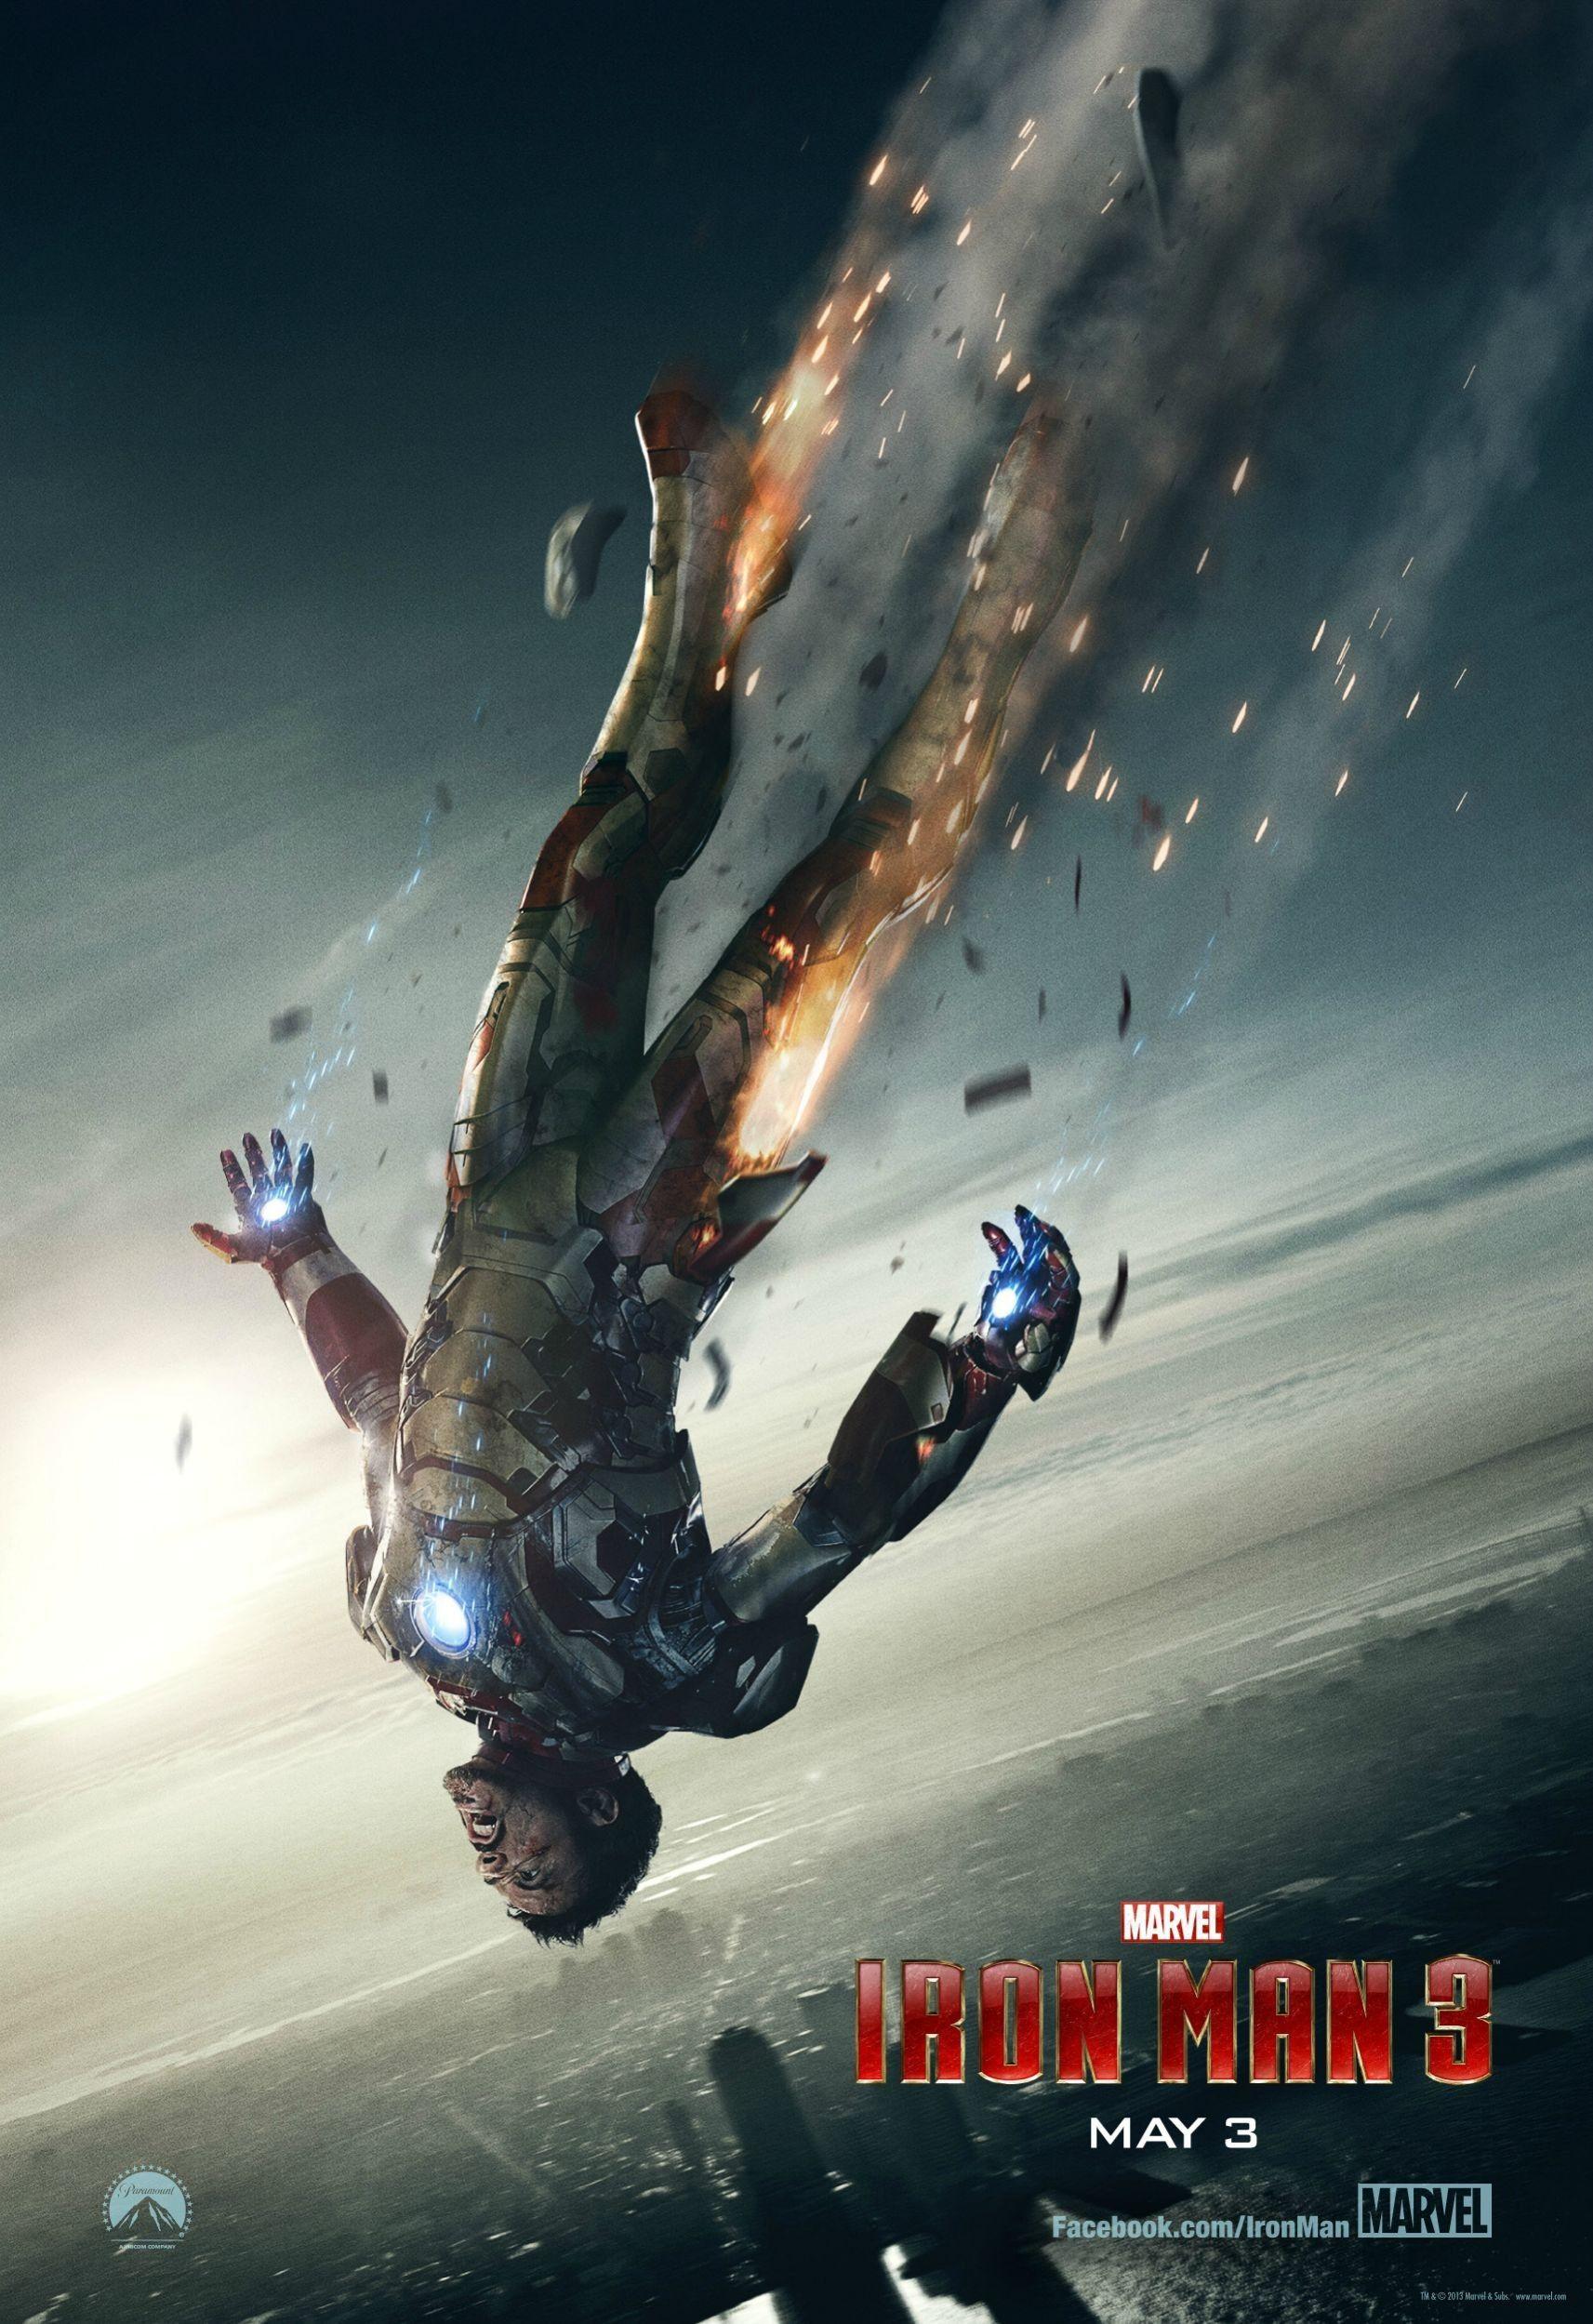 Iron Man, sparks, movie posters, upside down, falling, Iron